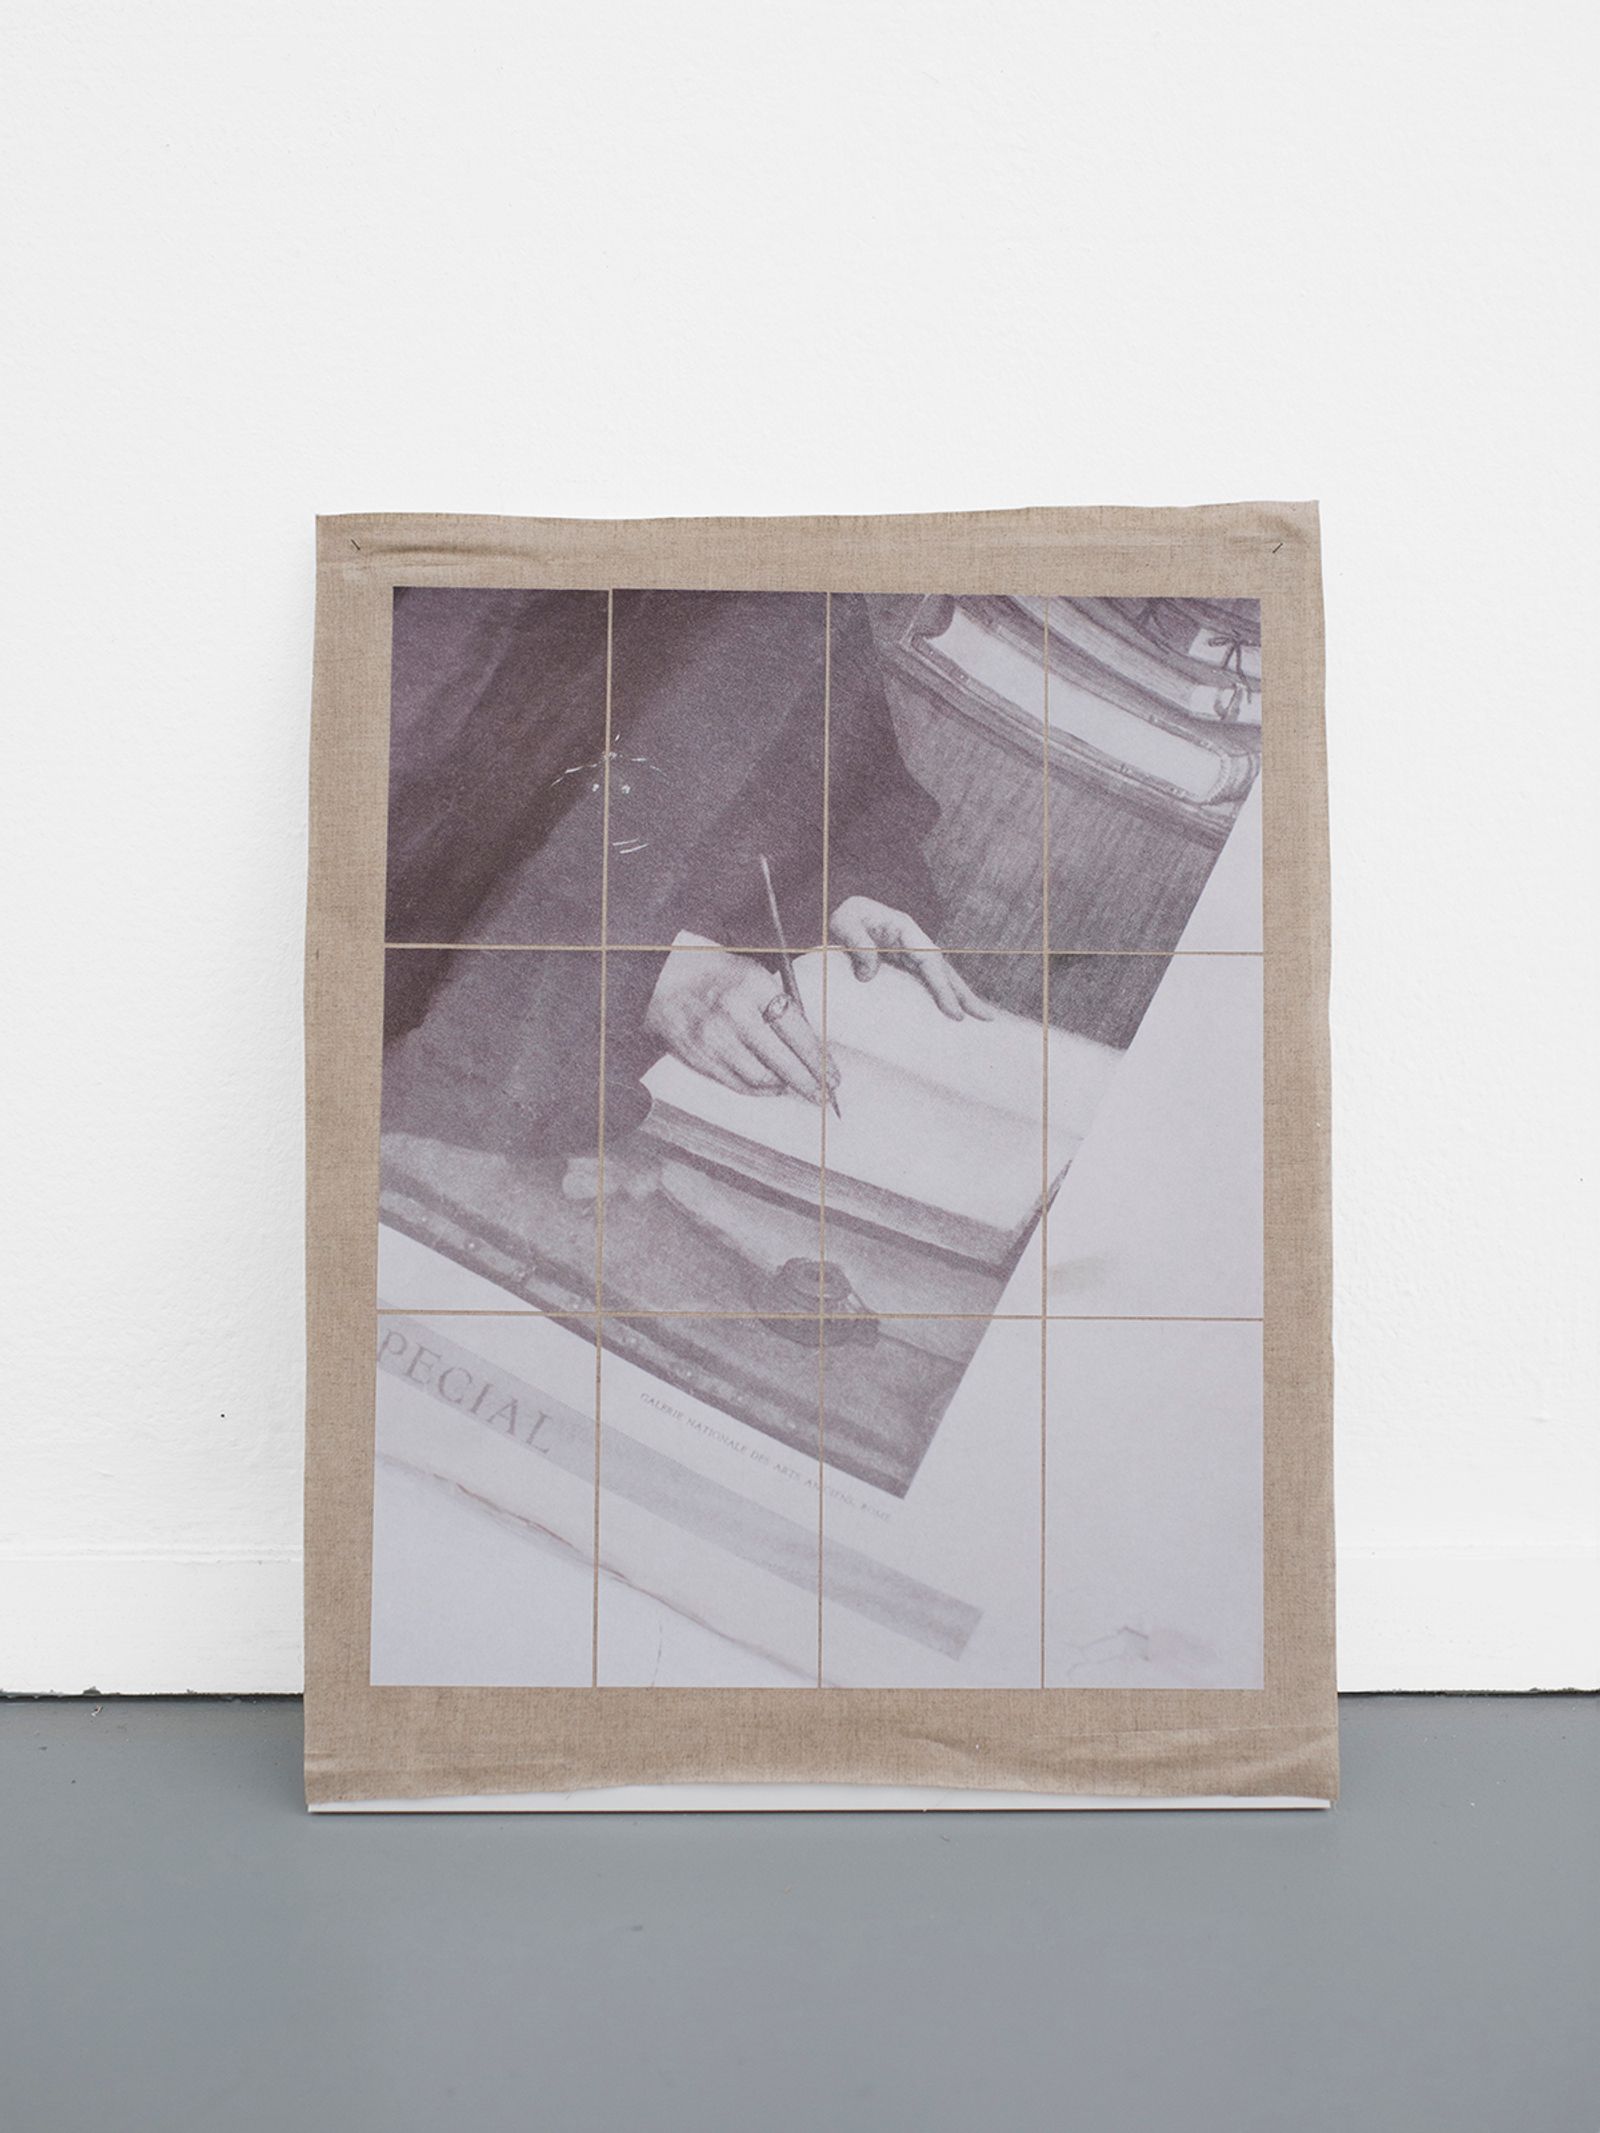 © Esther Hovers - Structures, Erasmus, 2019 58 x 46 cm / 22.8 x 18.1 in. Inkjet prints on Tosa Shi – 54 gsm, fixed on linen.